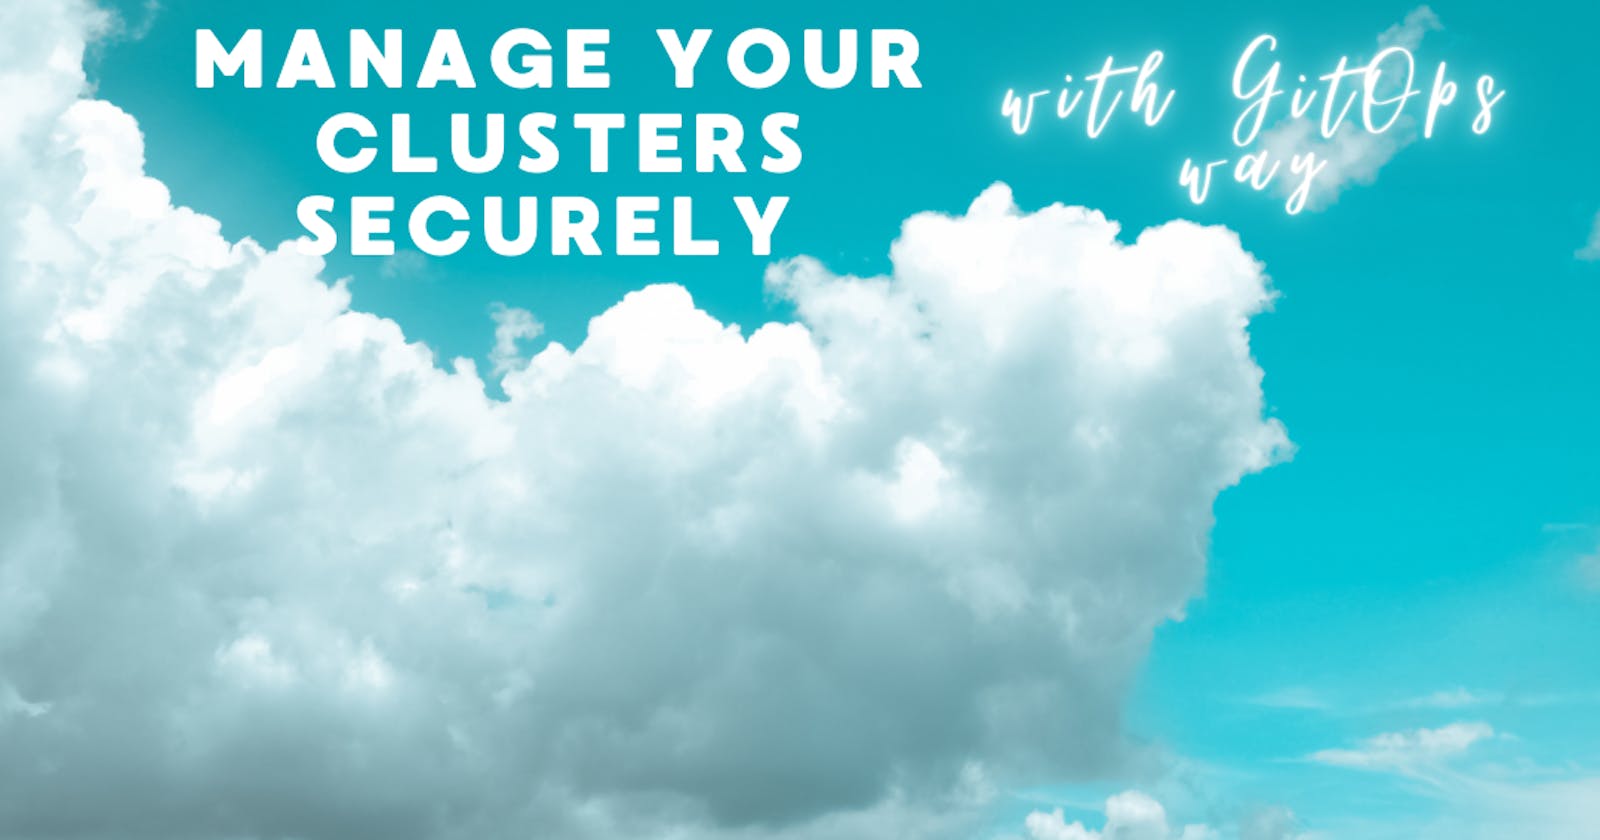 Manage your clusters securely with GitOps way